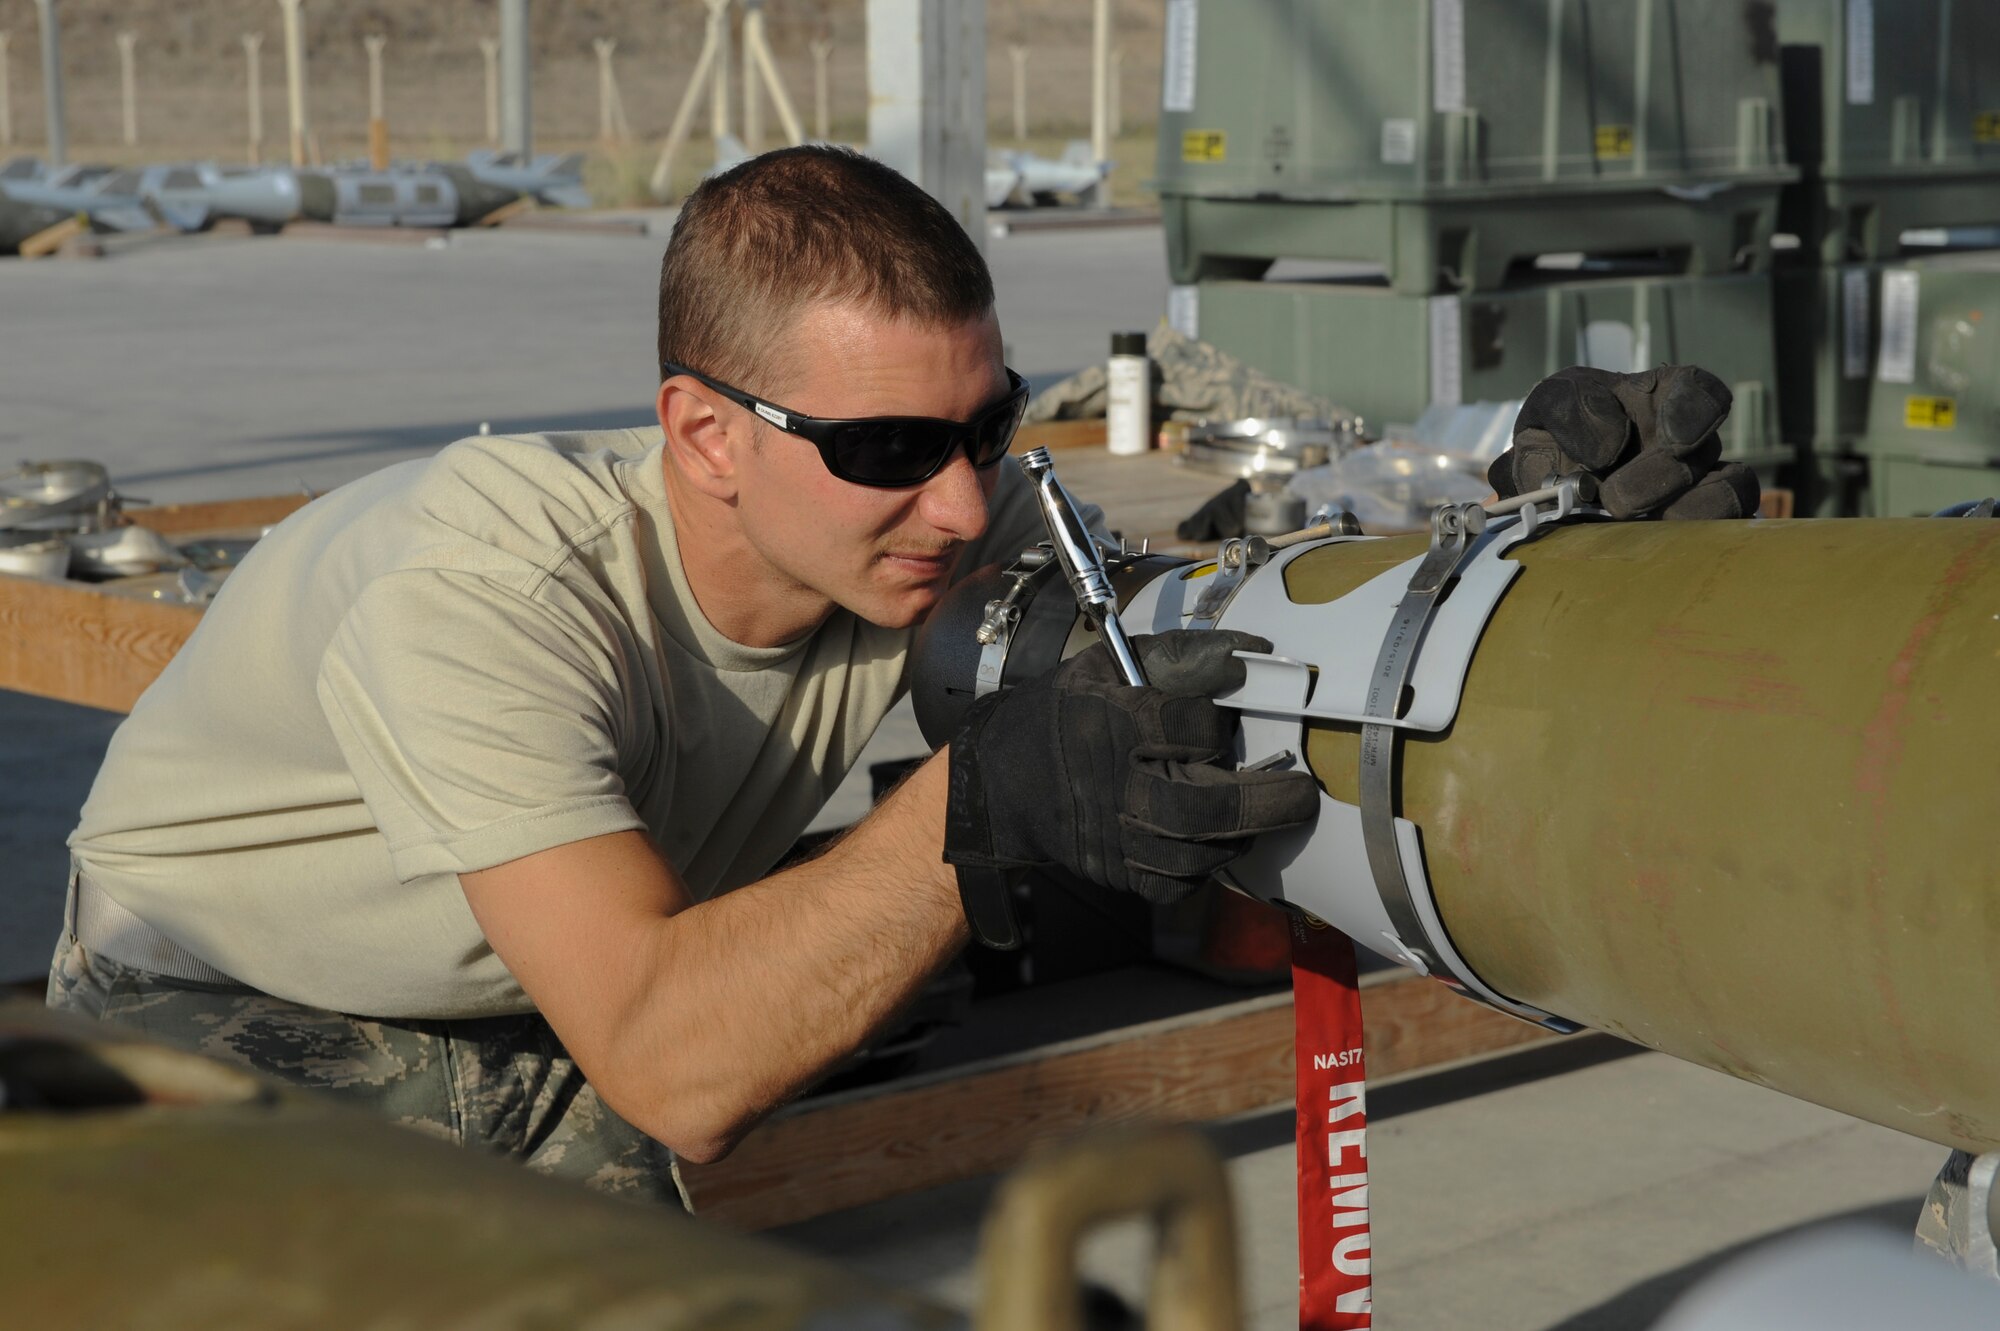 U.S. Air Force Staff Sgt. Benjamin, a 447th Expeditionary Aircraft Maintenance Squadron munitions systems journeyman, aligns a nose cone on a GBU-54 Laser Joint Direct Attack Munition bomb Oct. 29, 2016, at Incirlik Air Base, Turkey. The bombs are primarily loaded onto A-10 Thunderbolt IIs that operate out of Incirlik. (U.S. Air Force photo by Airman 1st Class Devin M. Rumbaugh)
